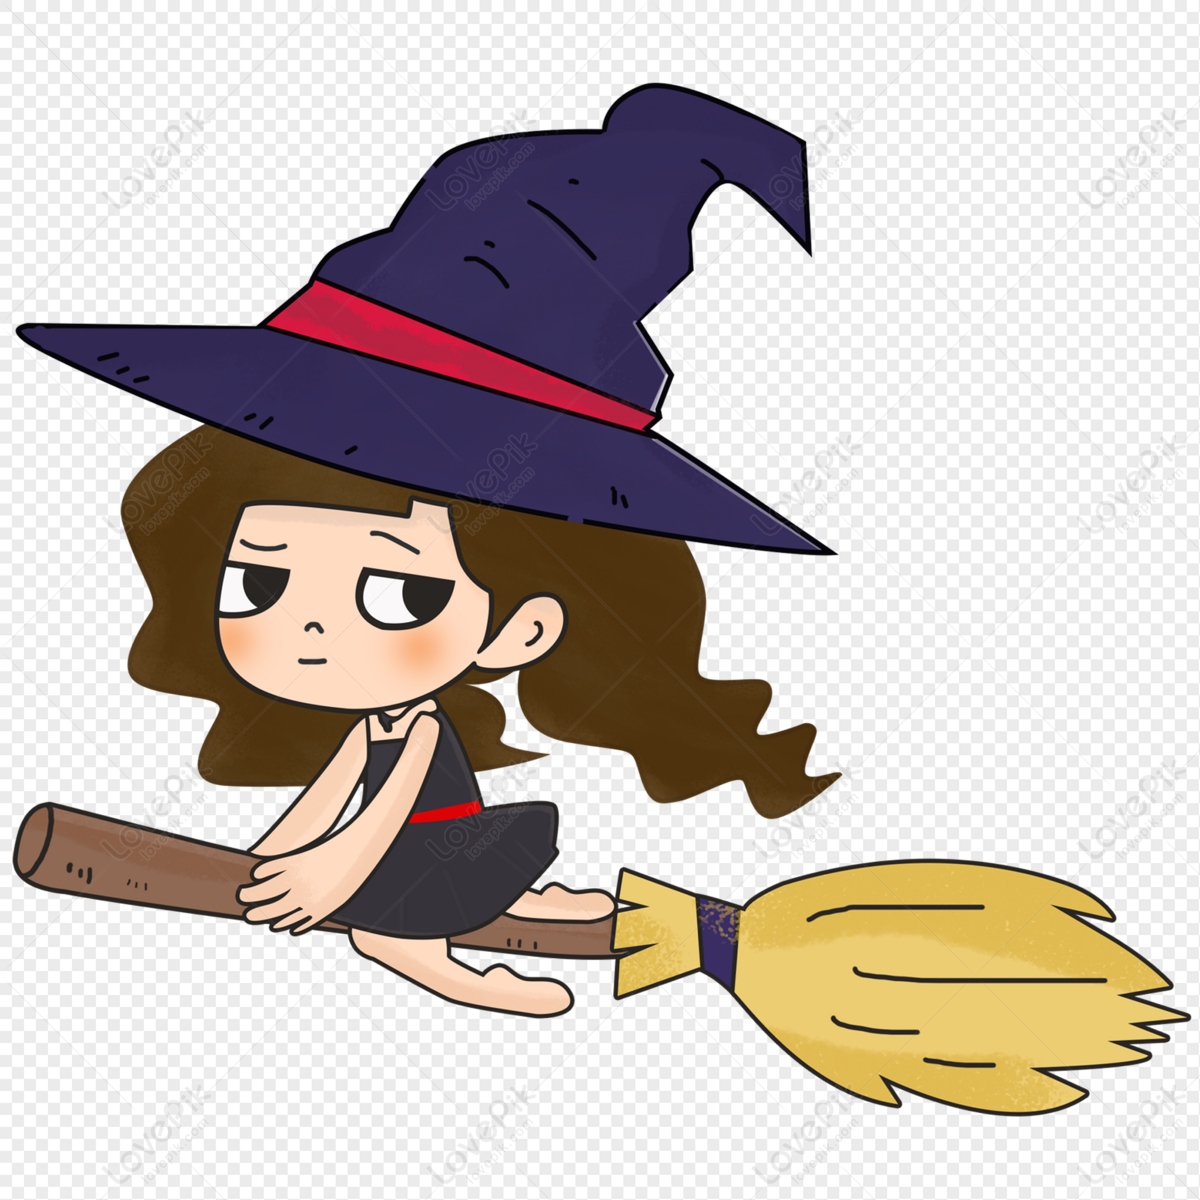 Witch PNG Image Free Download And Clipart Image For Free Download - Lovepik  | 400194961